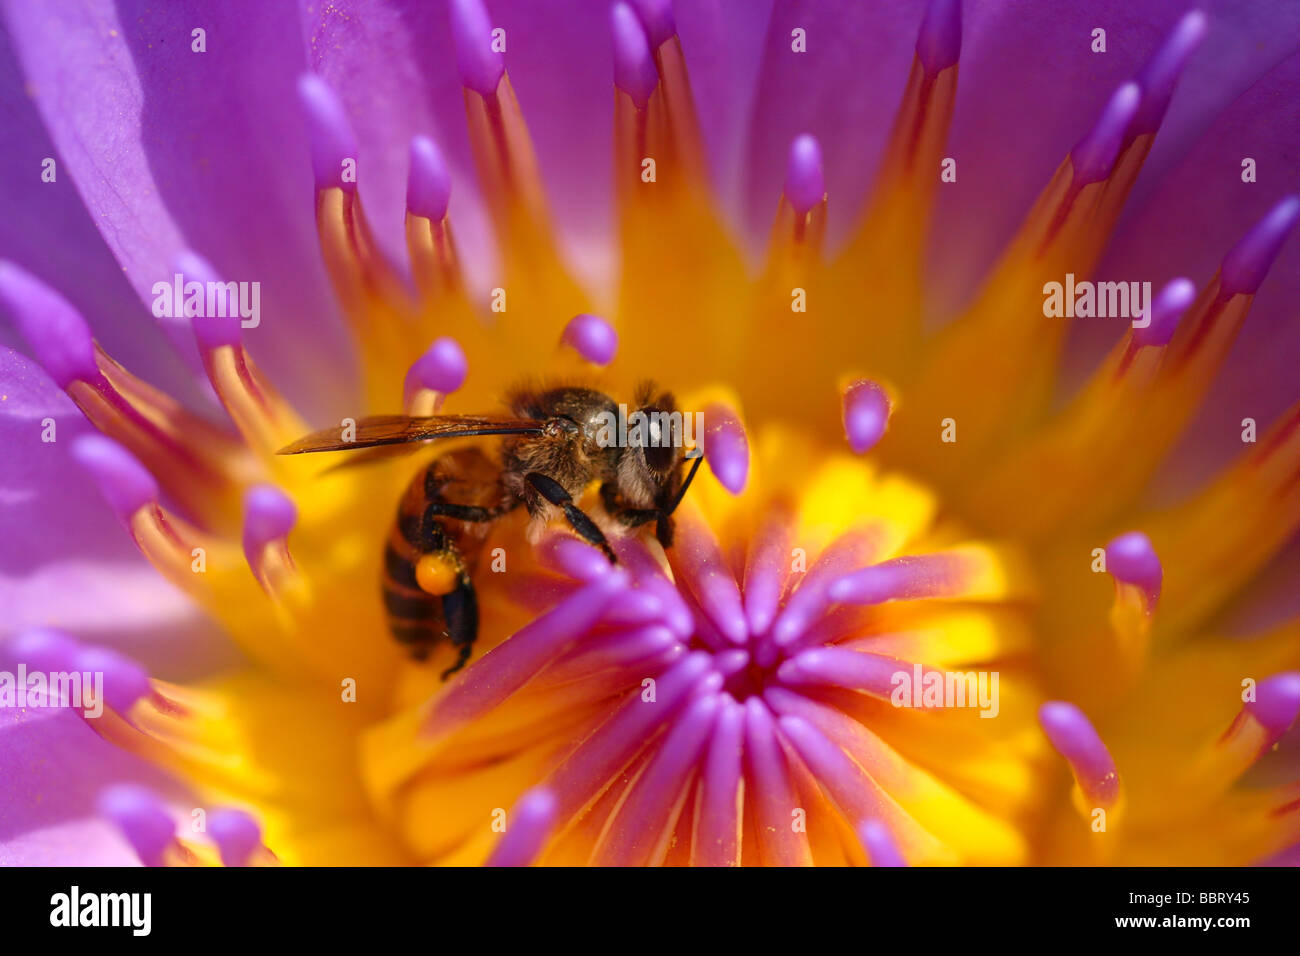 A bee on the waterlily. Outdoor natural setting in the garden. Stock Photo